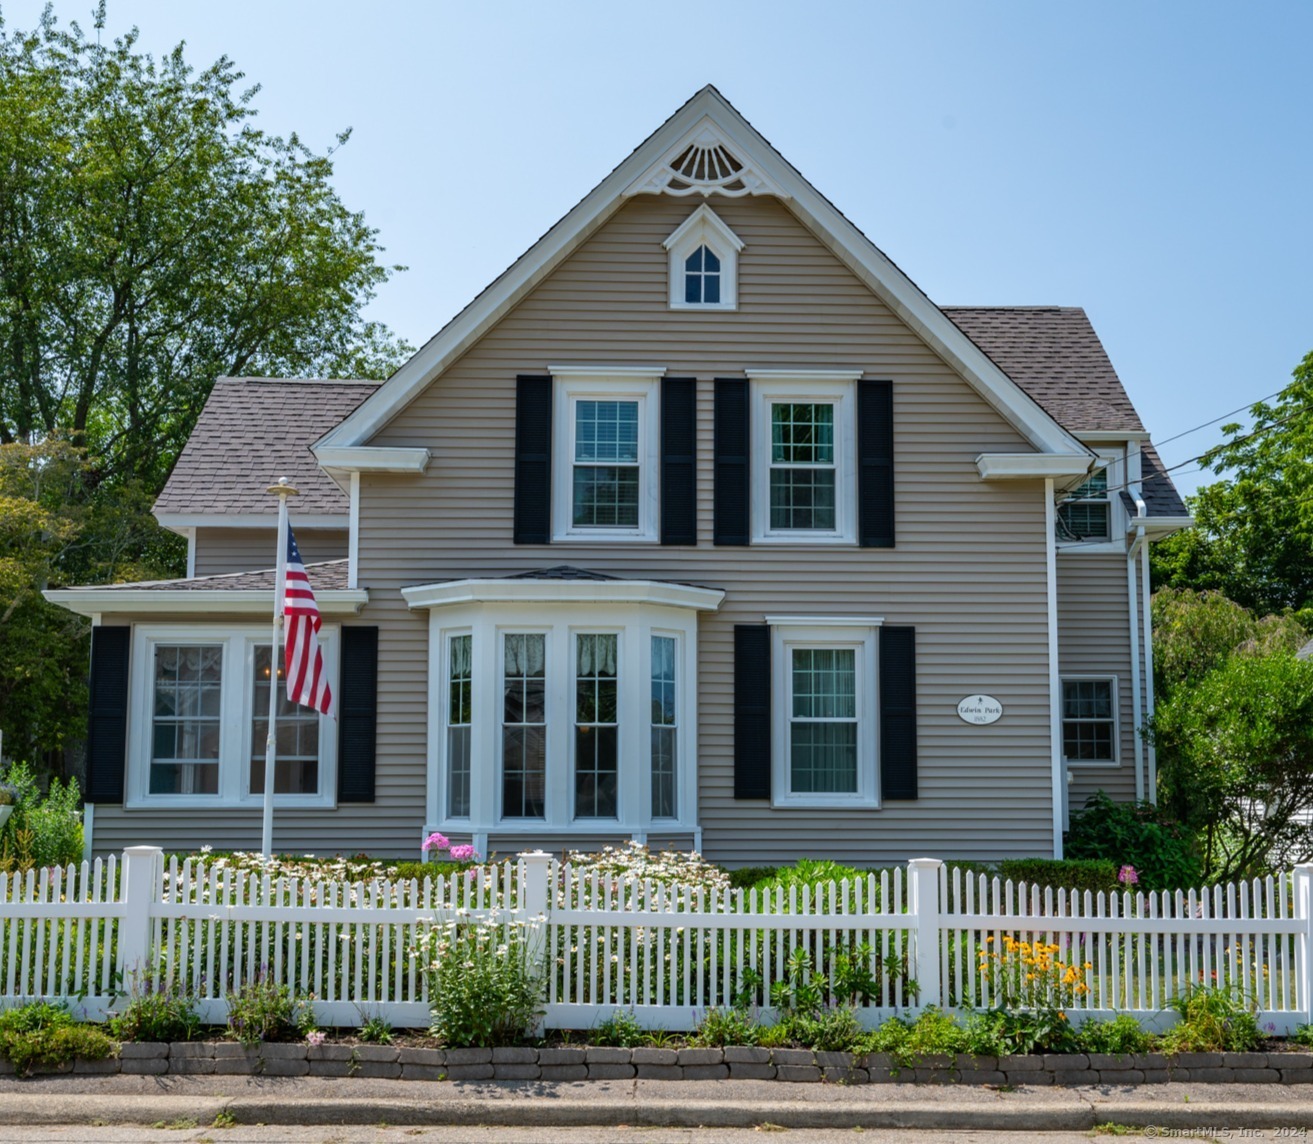 77 Cottage Street, Groton, Connecticut - 4 Bedrooms  
3 Bathrooms  
10 Rooms - 